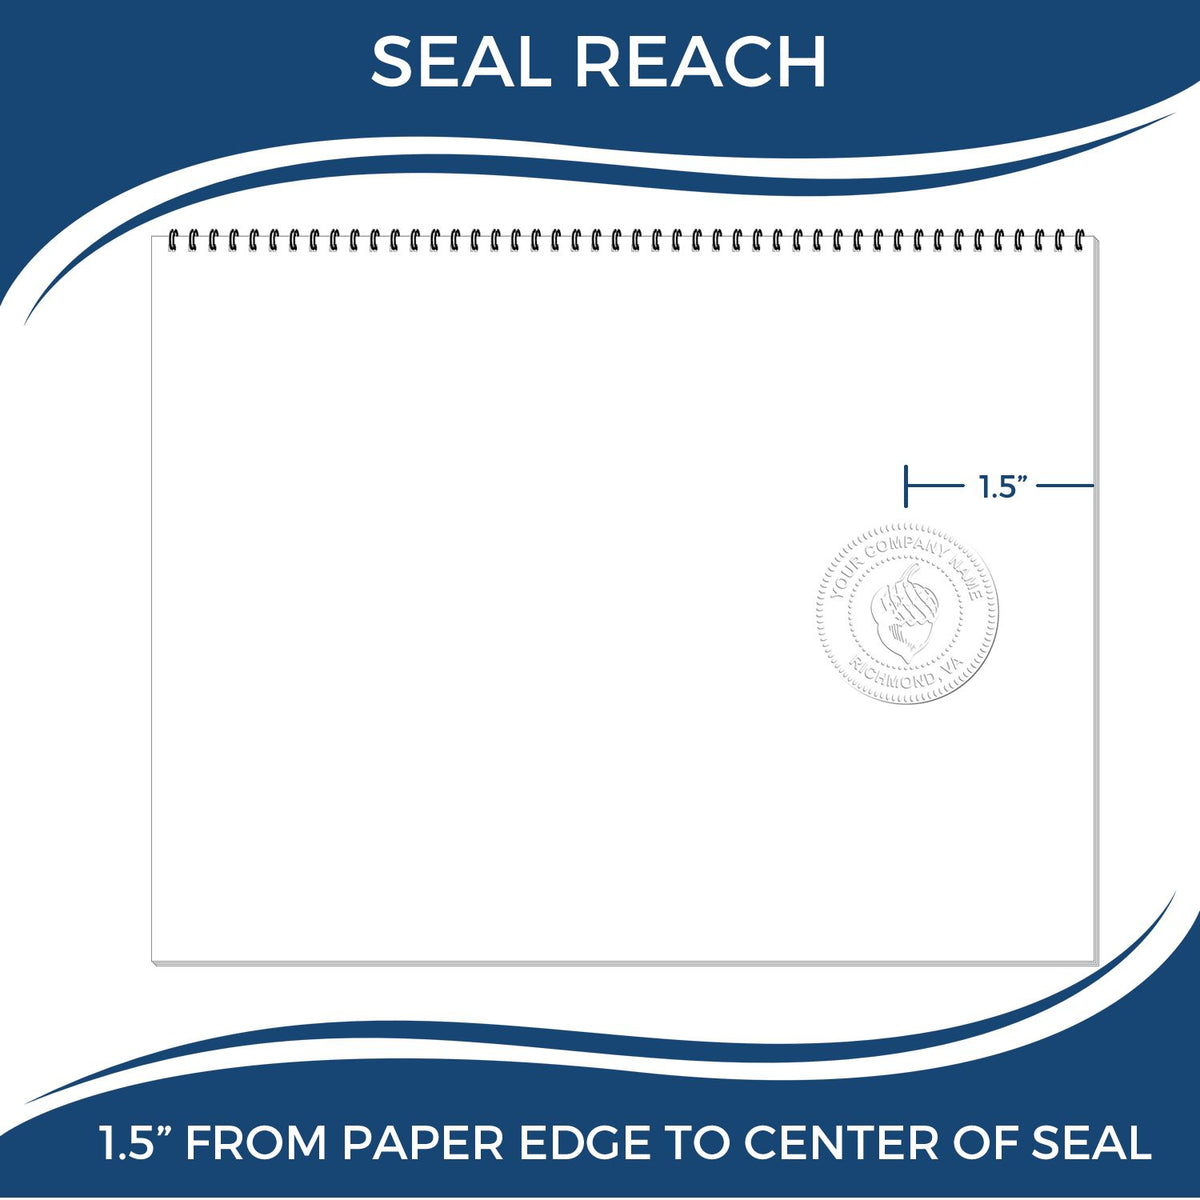 An infographic showing the seal reach which is represented by a ruler and a miniature seal image of the Gift Illinois Geologist Seal